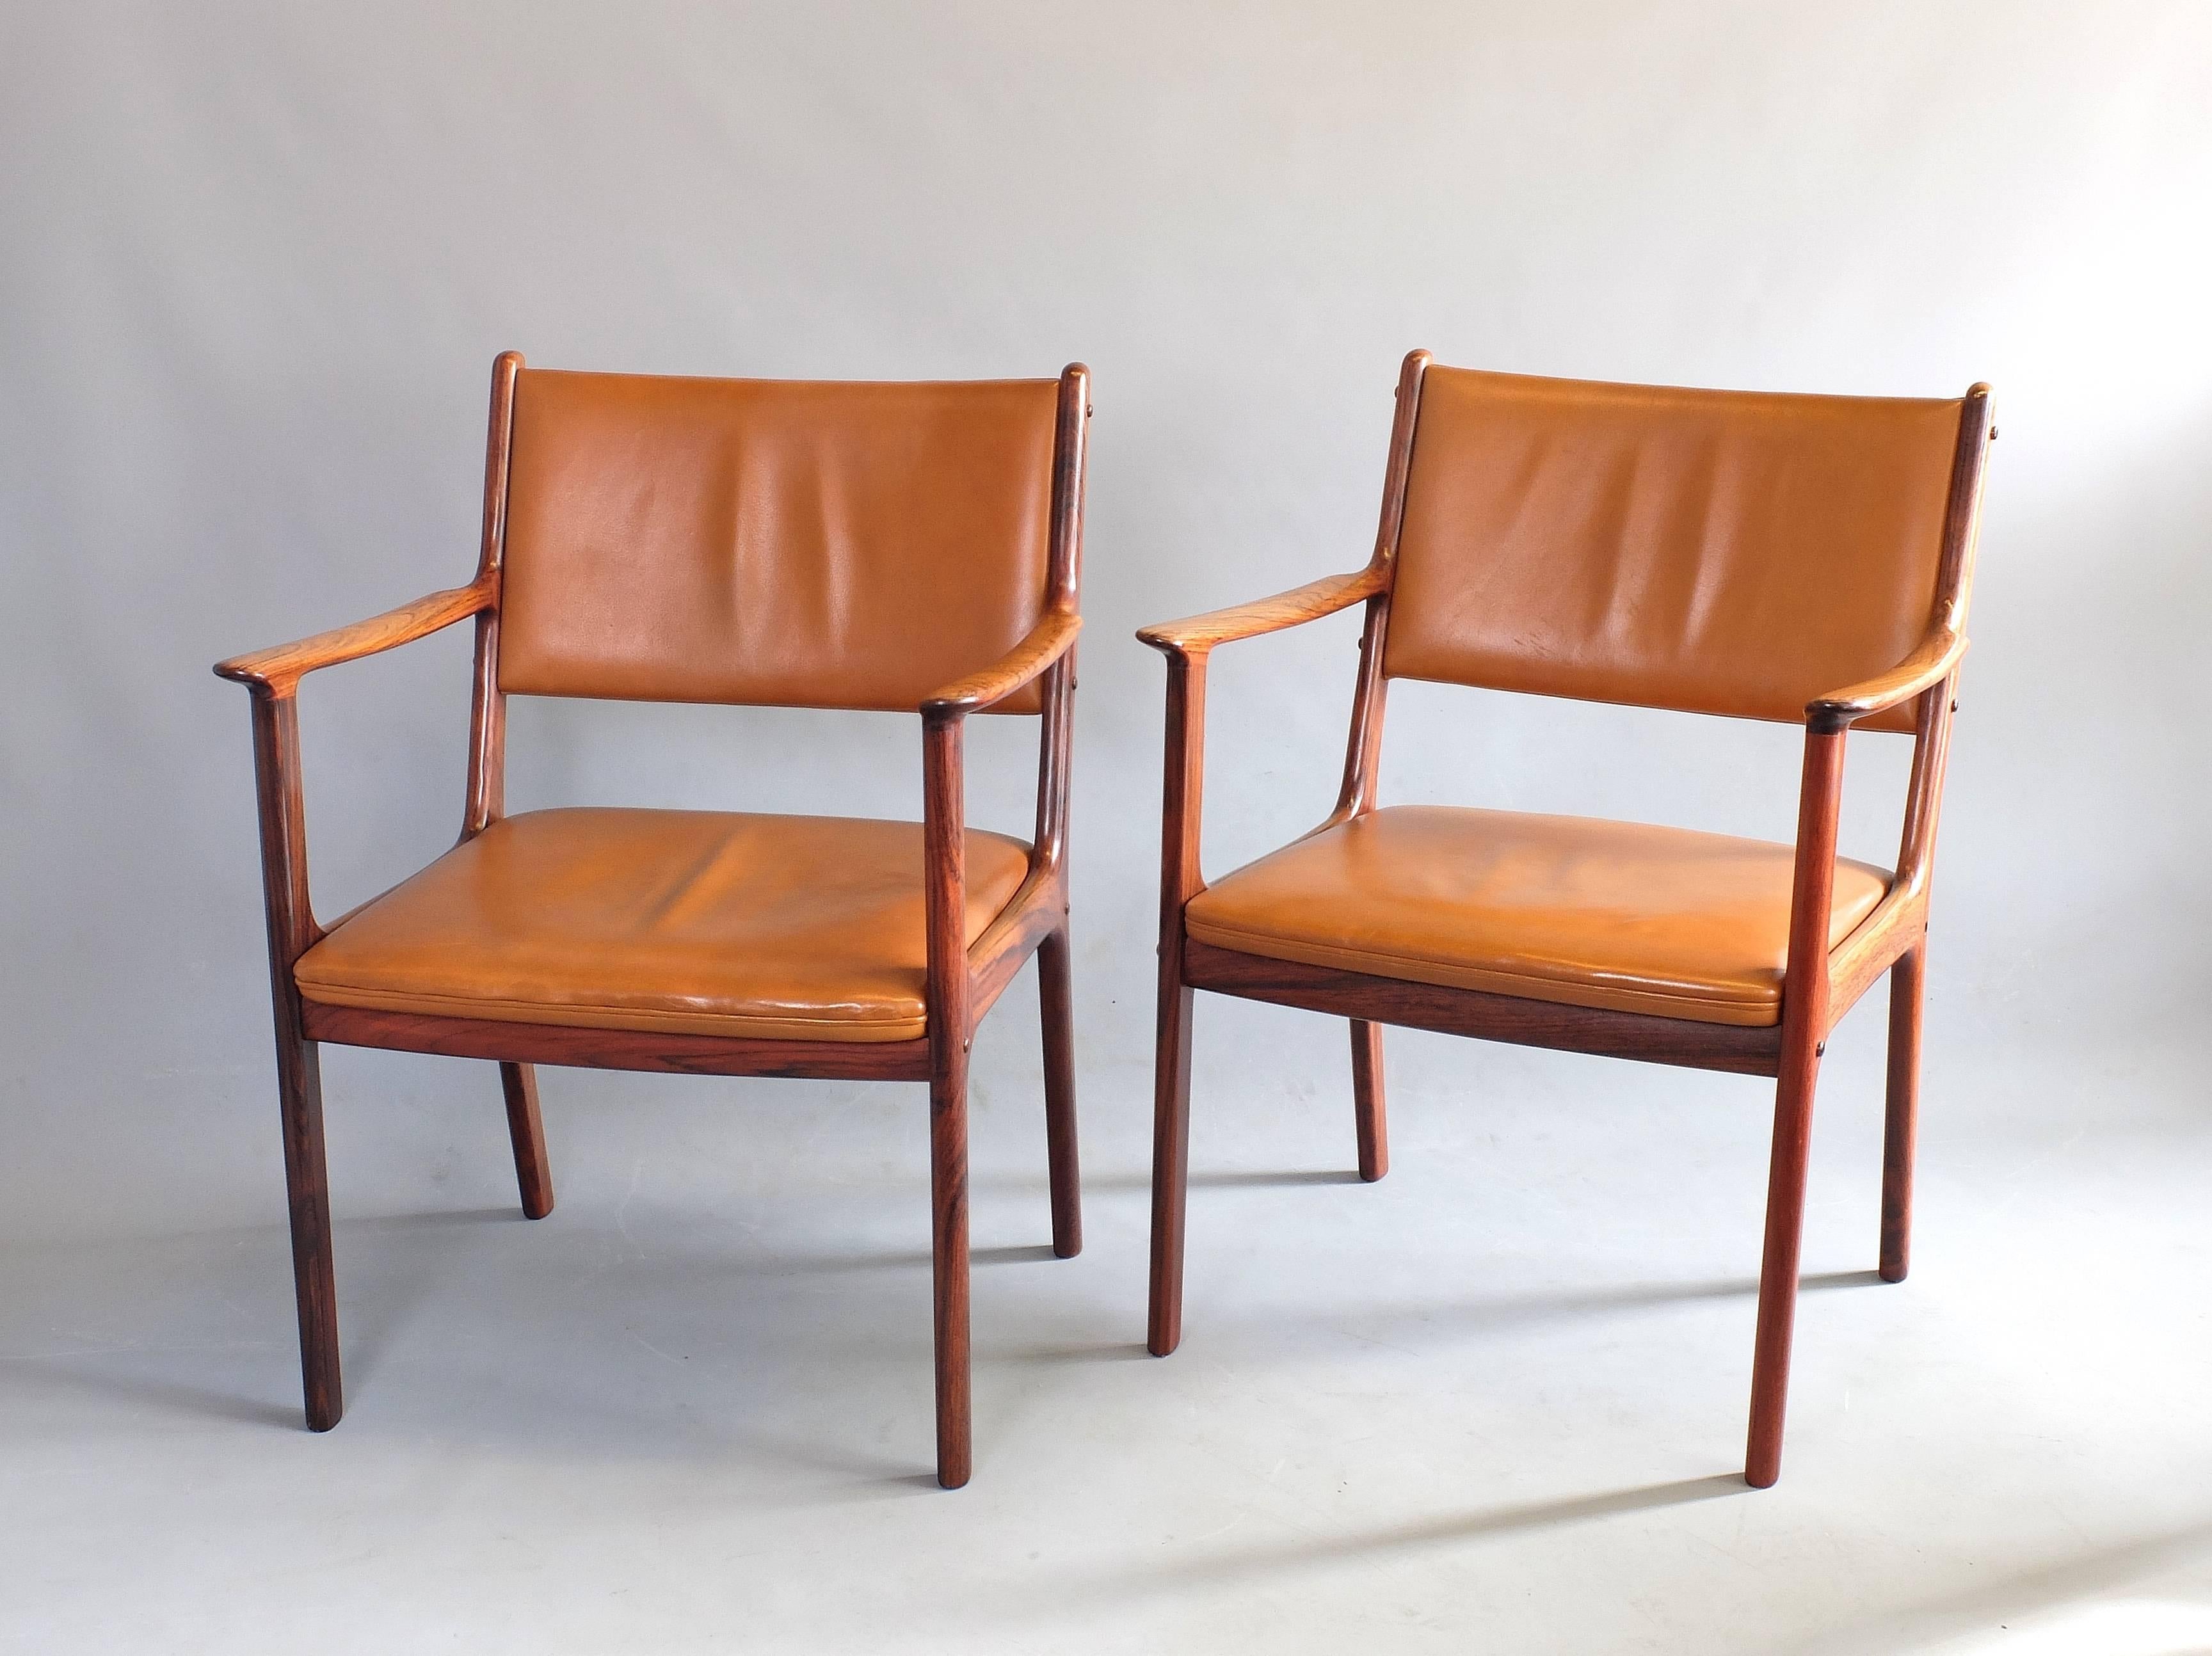 A pair of armchairs designed by leading Danish furniture designer Ole Wanscher, circa 1960, and produced by Poul Jeppesen. This is model PJ412 in beautifully grained hardwood. The chairs are upholstered in the original cognac coloured real leather,